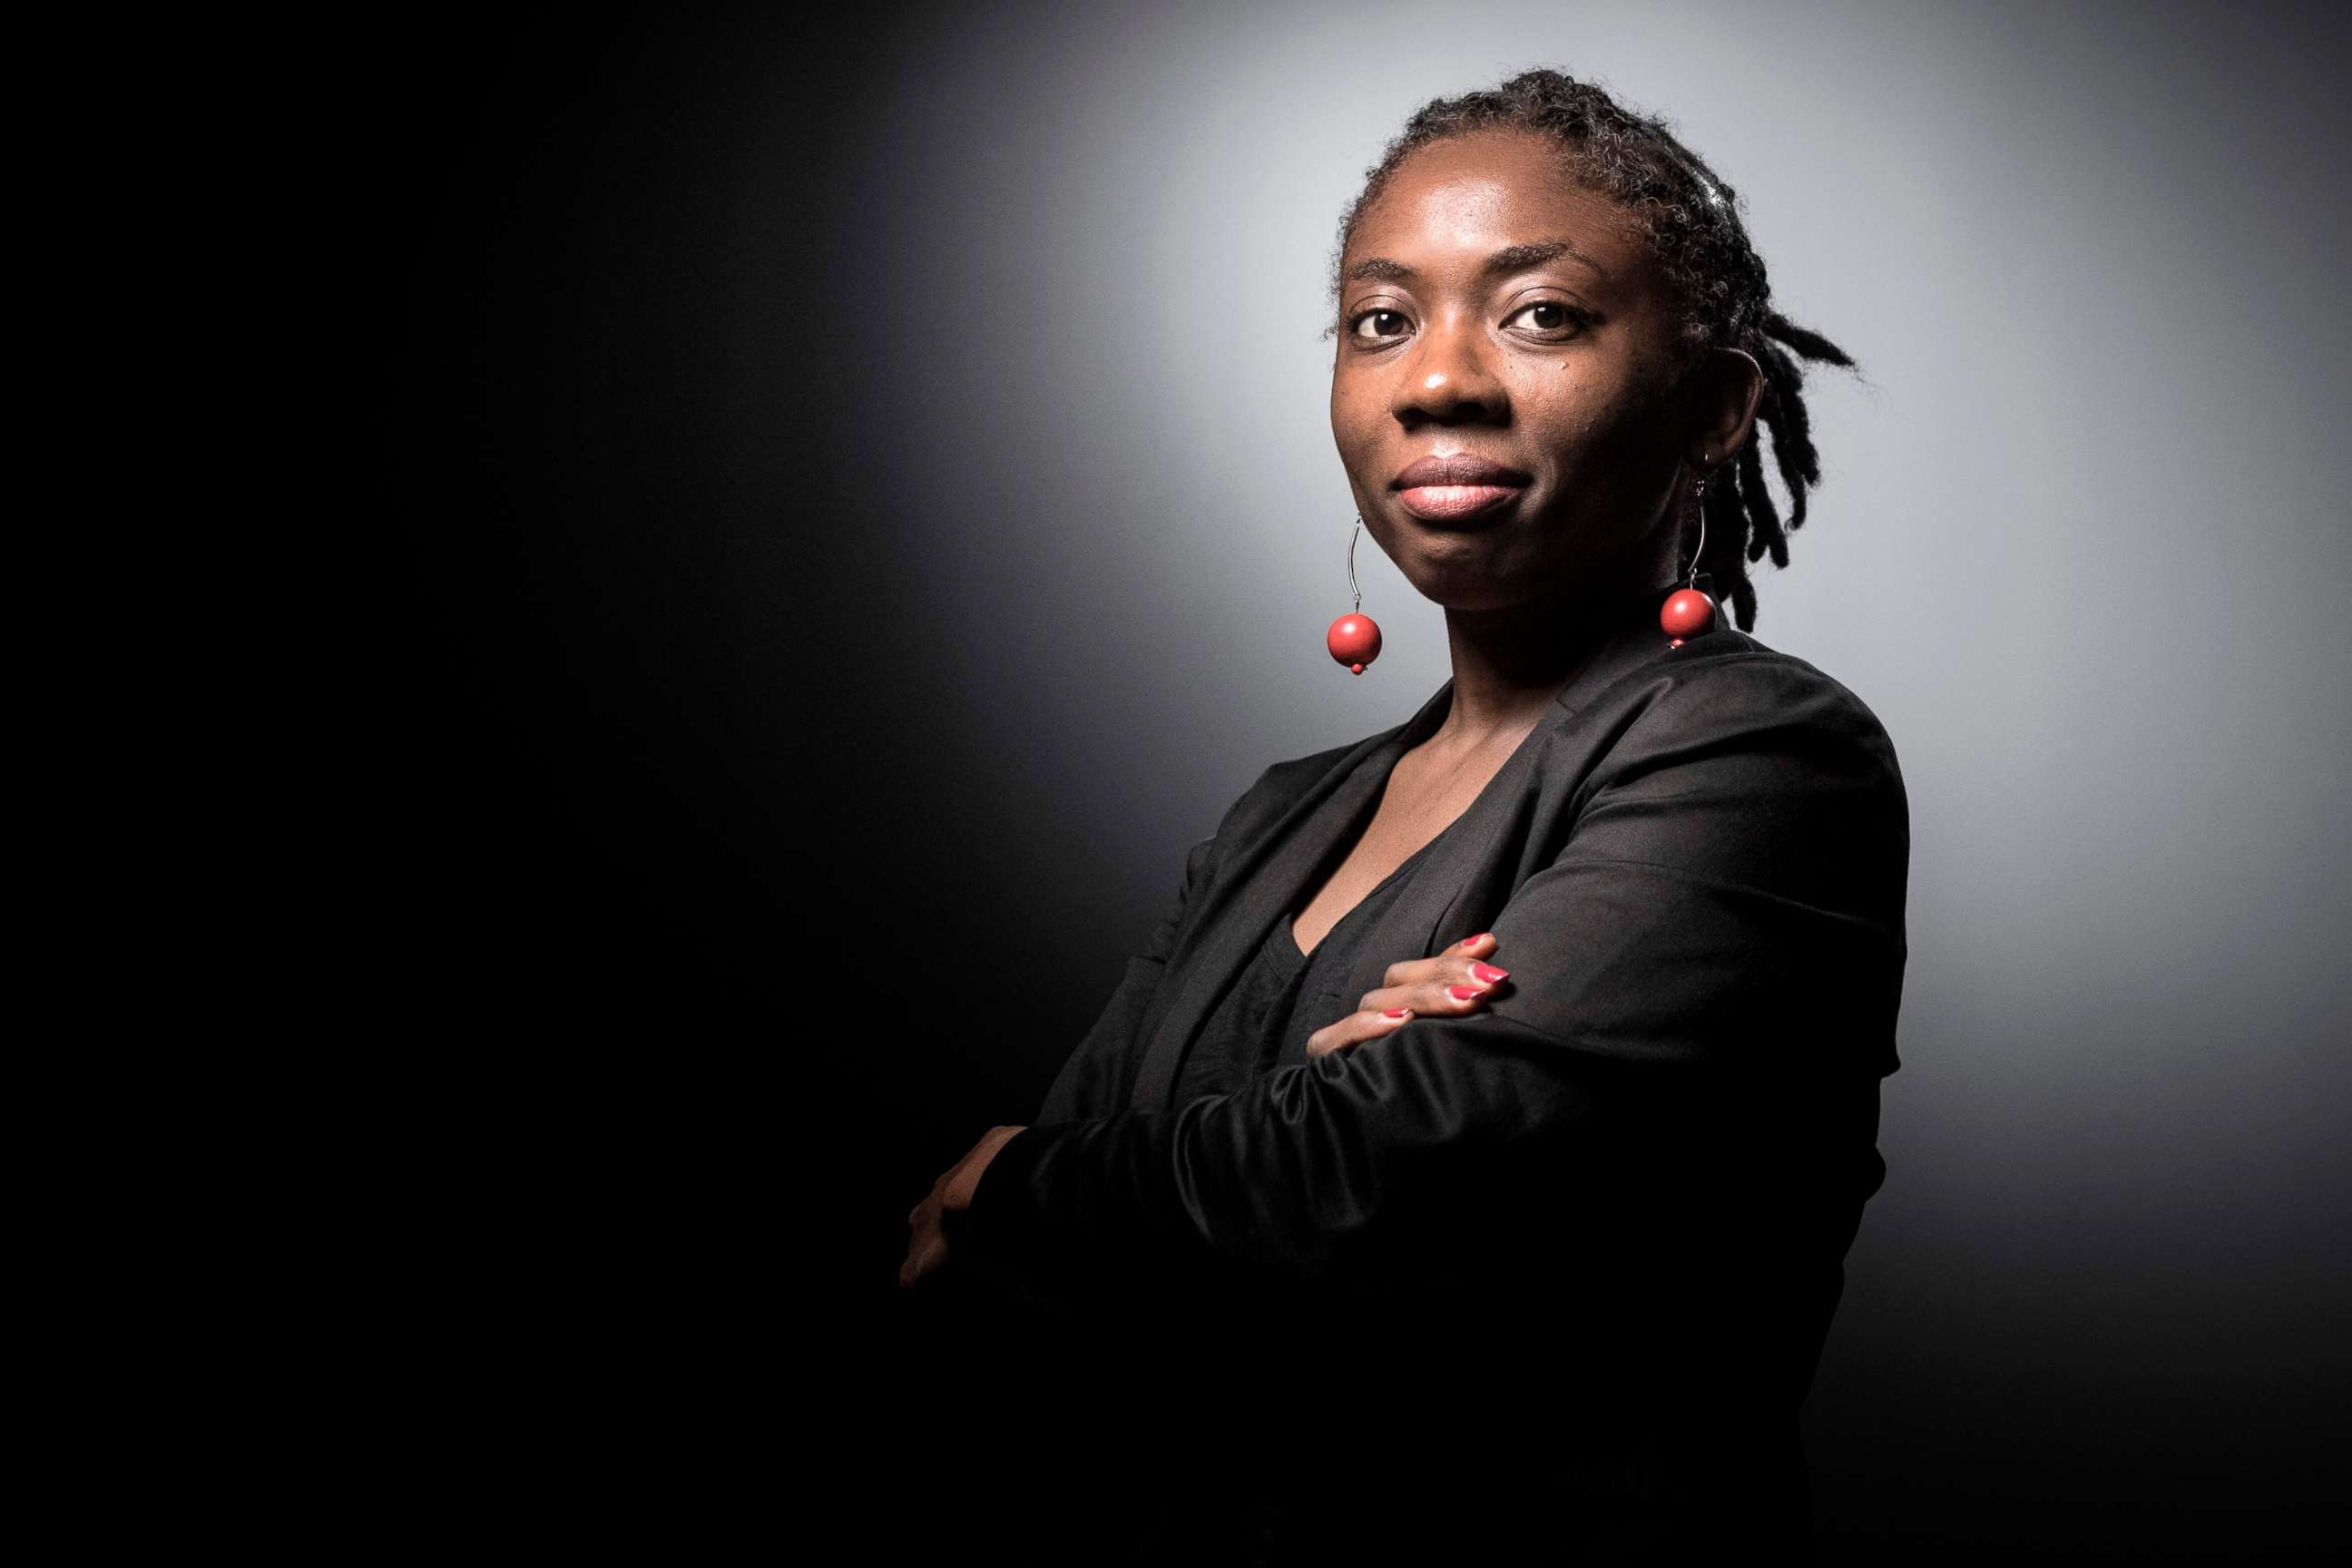 PHOTO: French leftist La France Insoumise (LFI) member of Parliament Daniele Obono poses during a photo session in Paris.